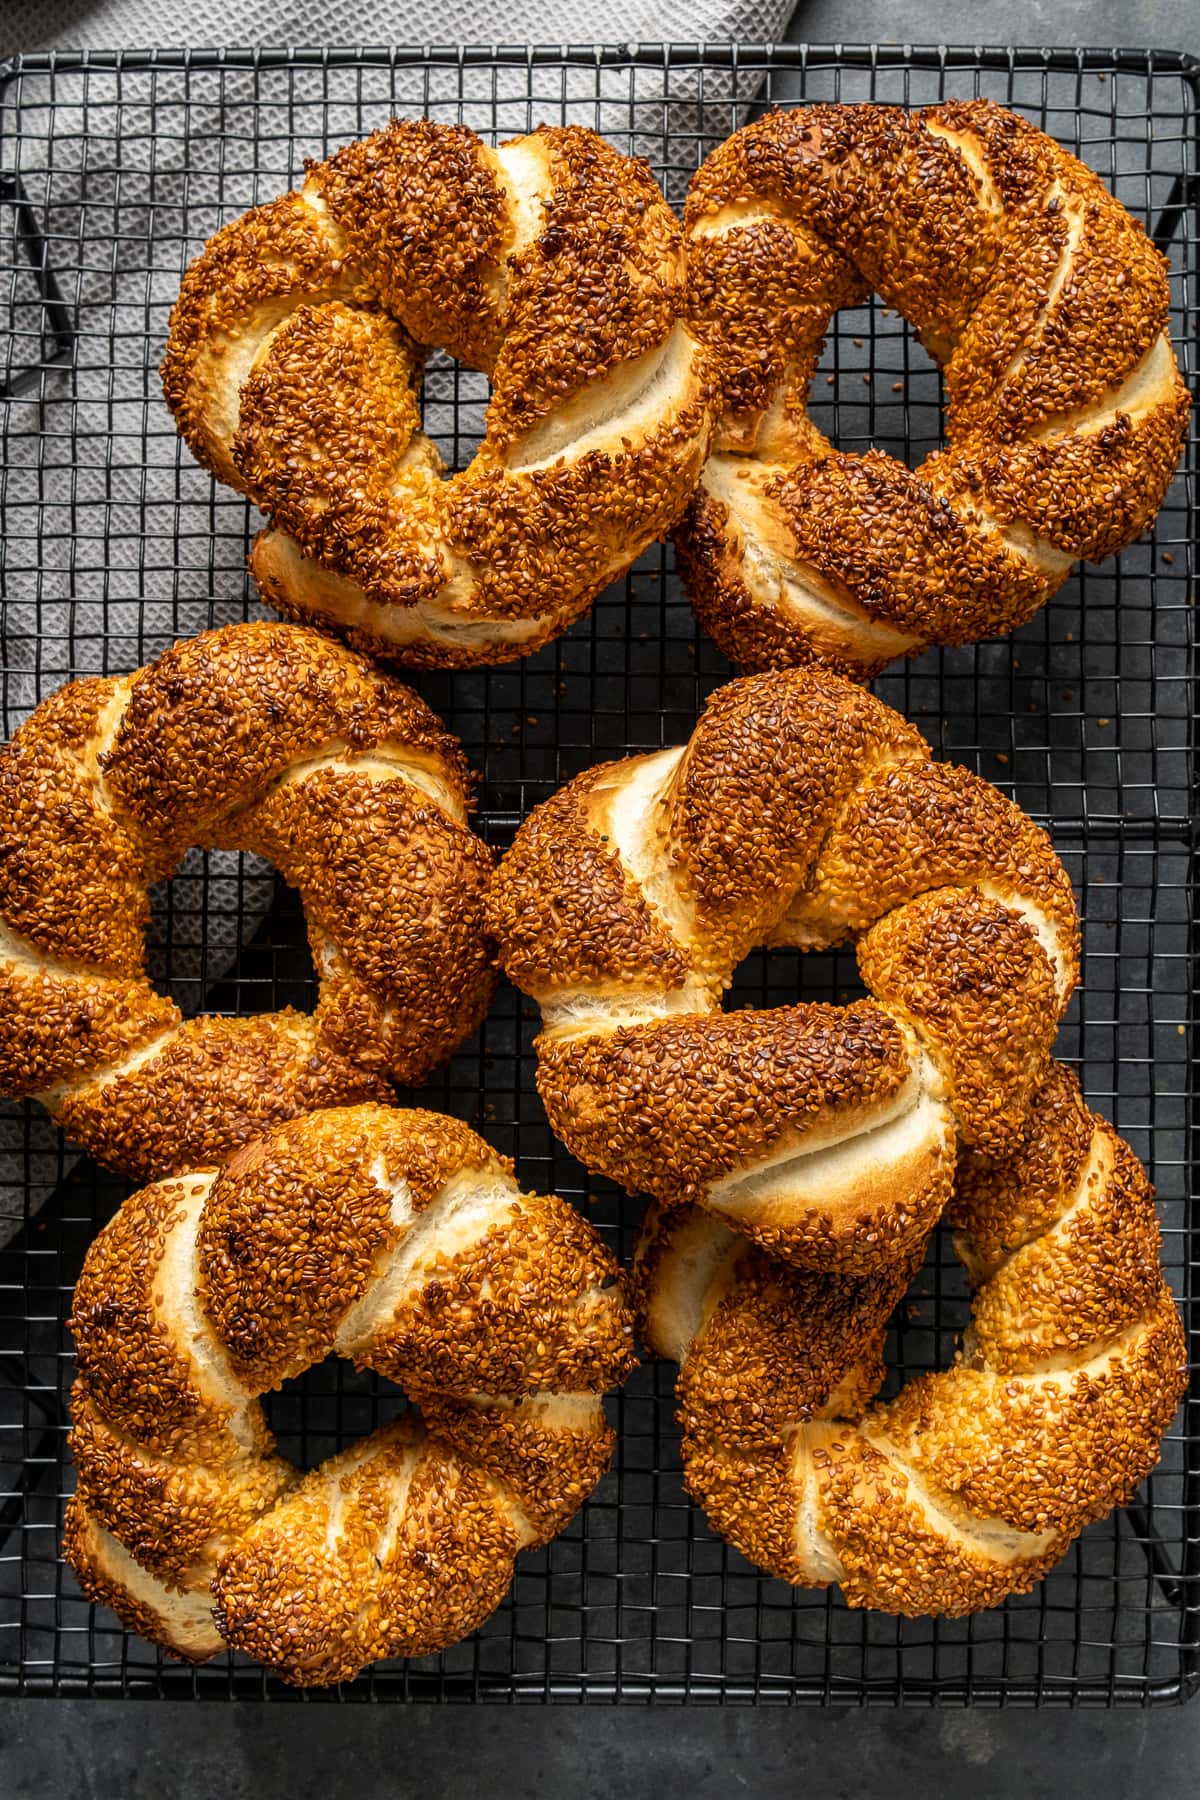 Turkish style bagels coated with sesame seeds called simit on a wire rack on a dark background.